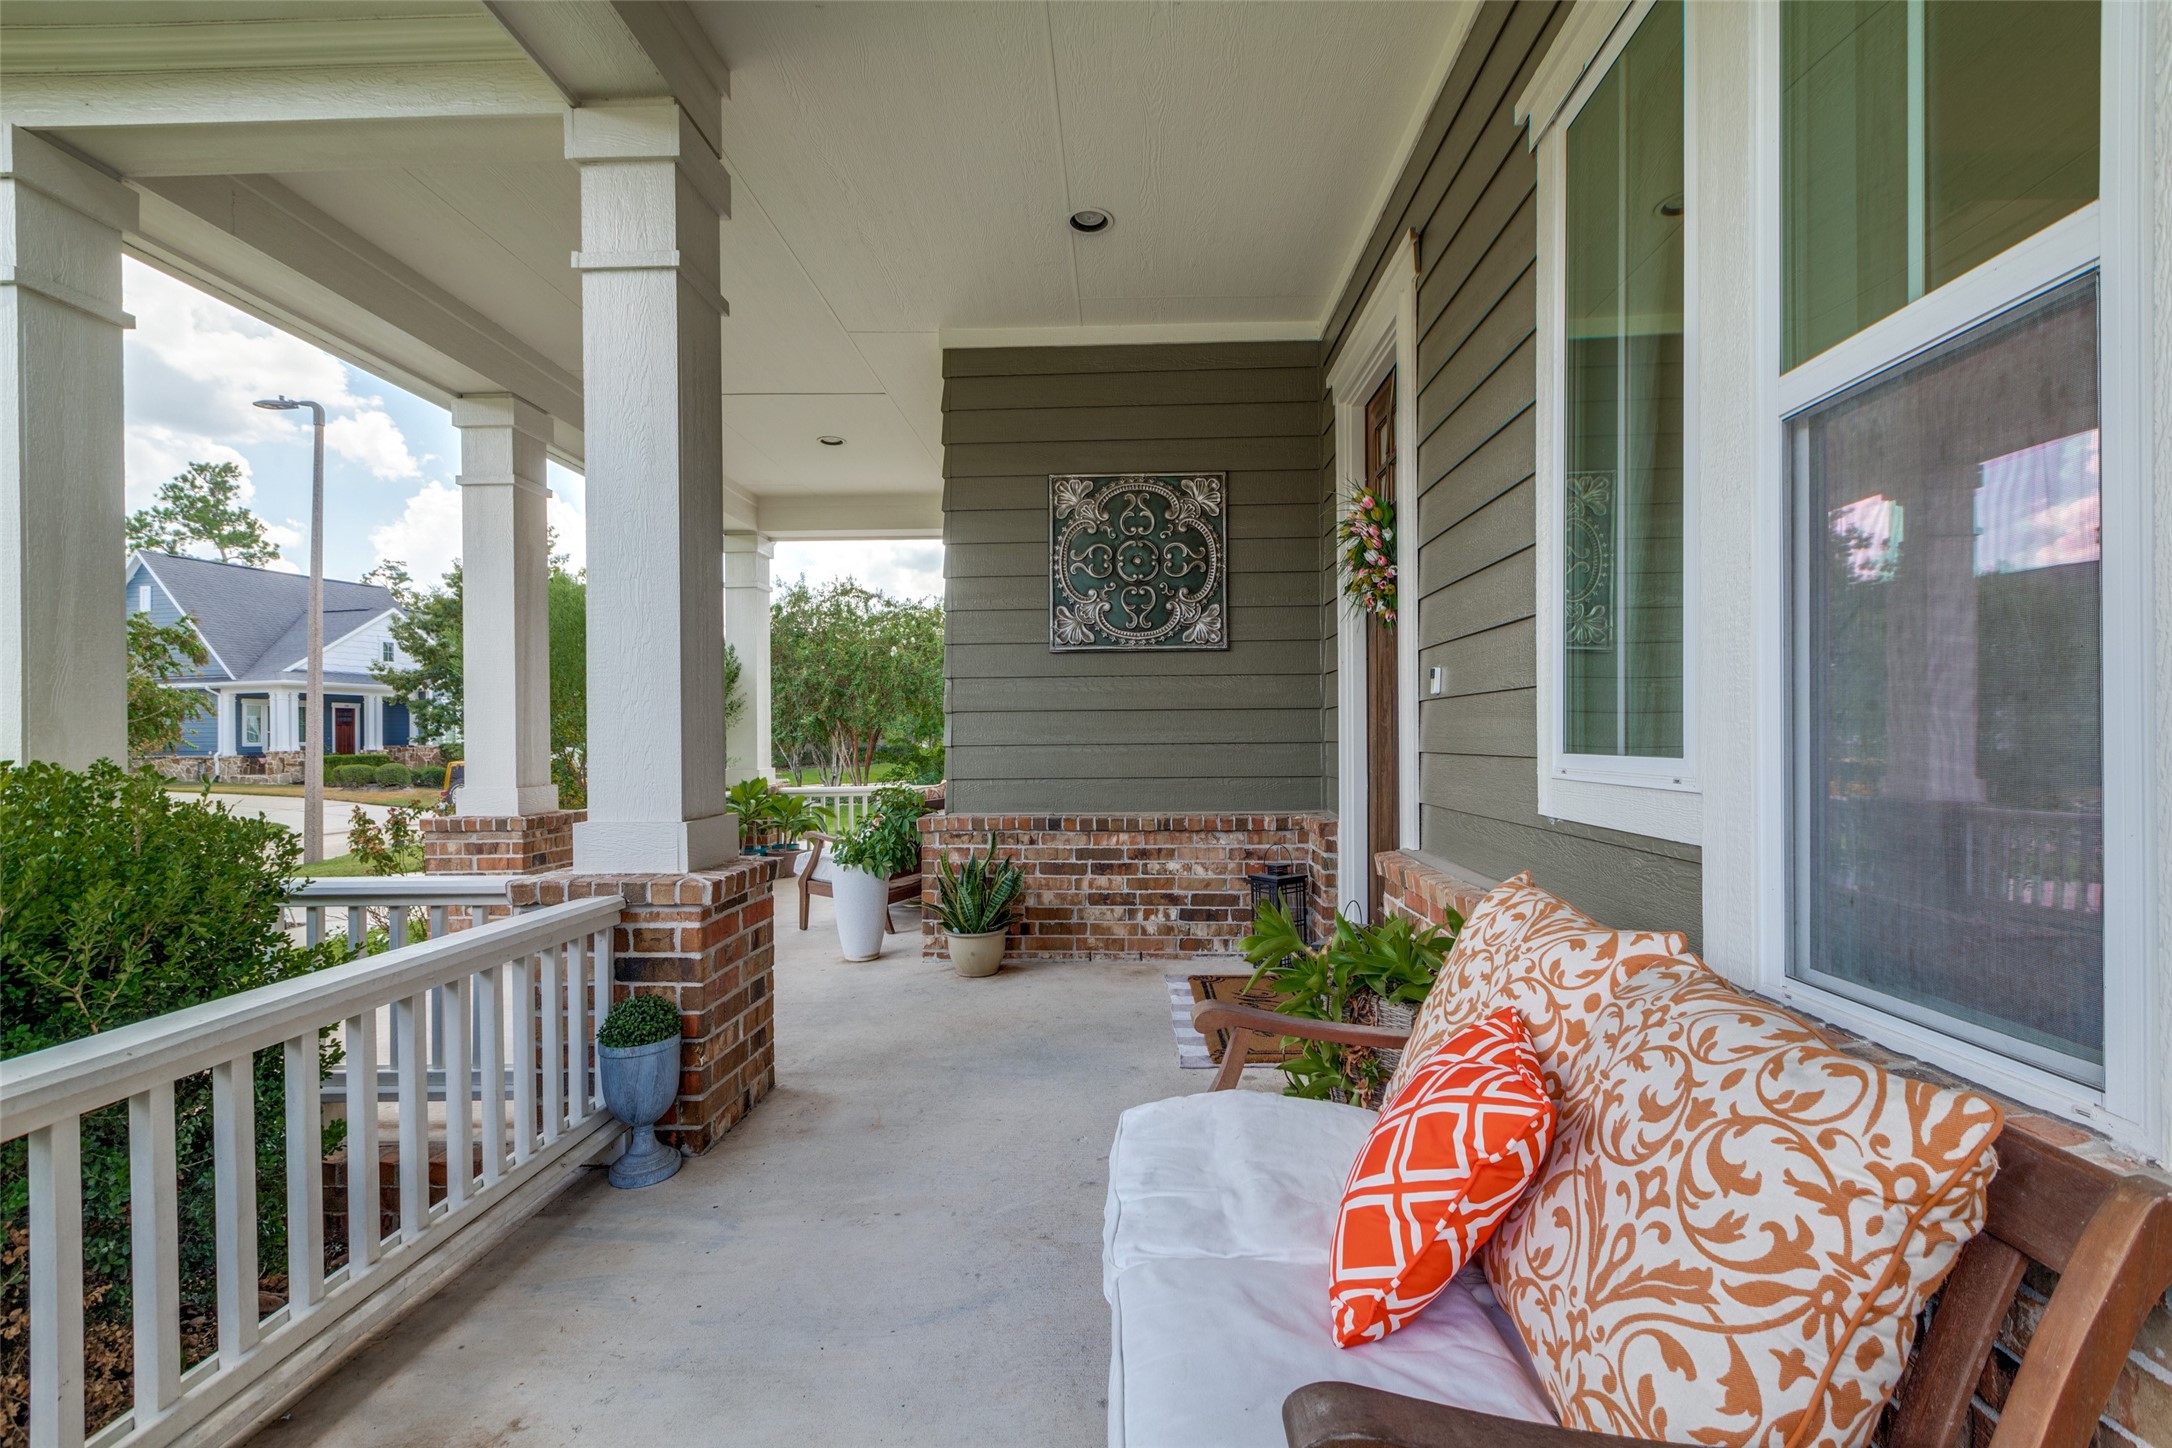 Enjoy a morning cup of coffee on this inviting porch.